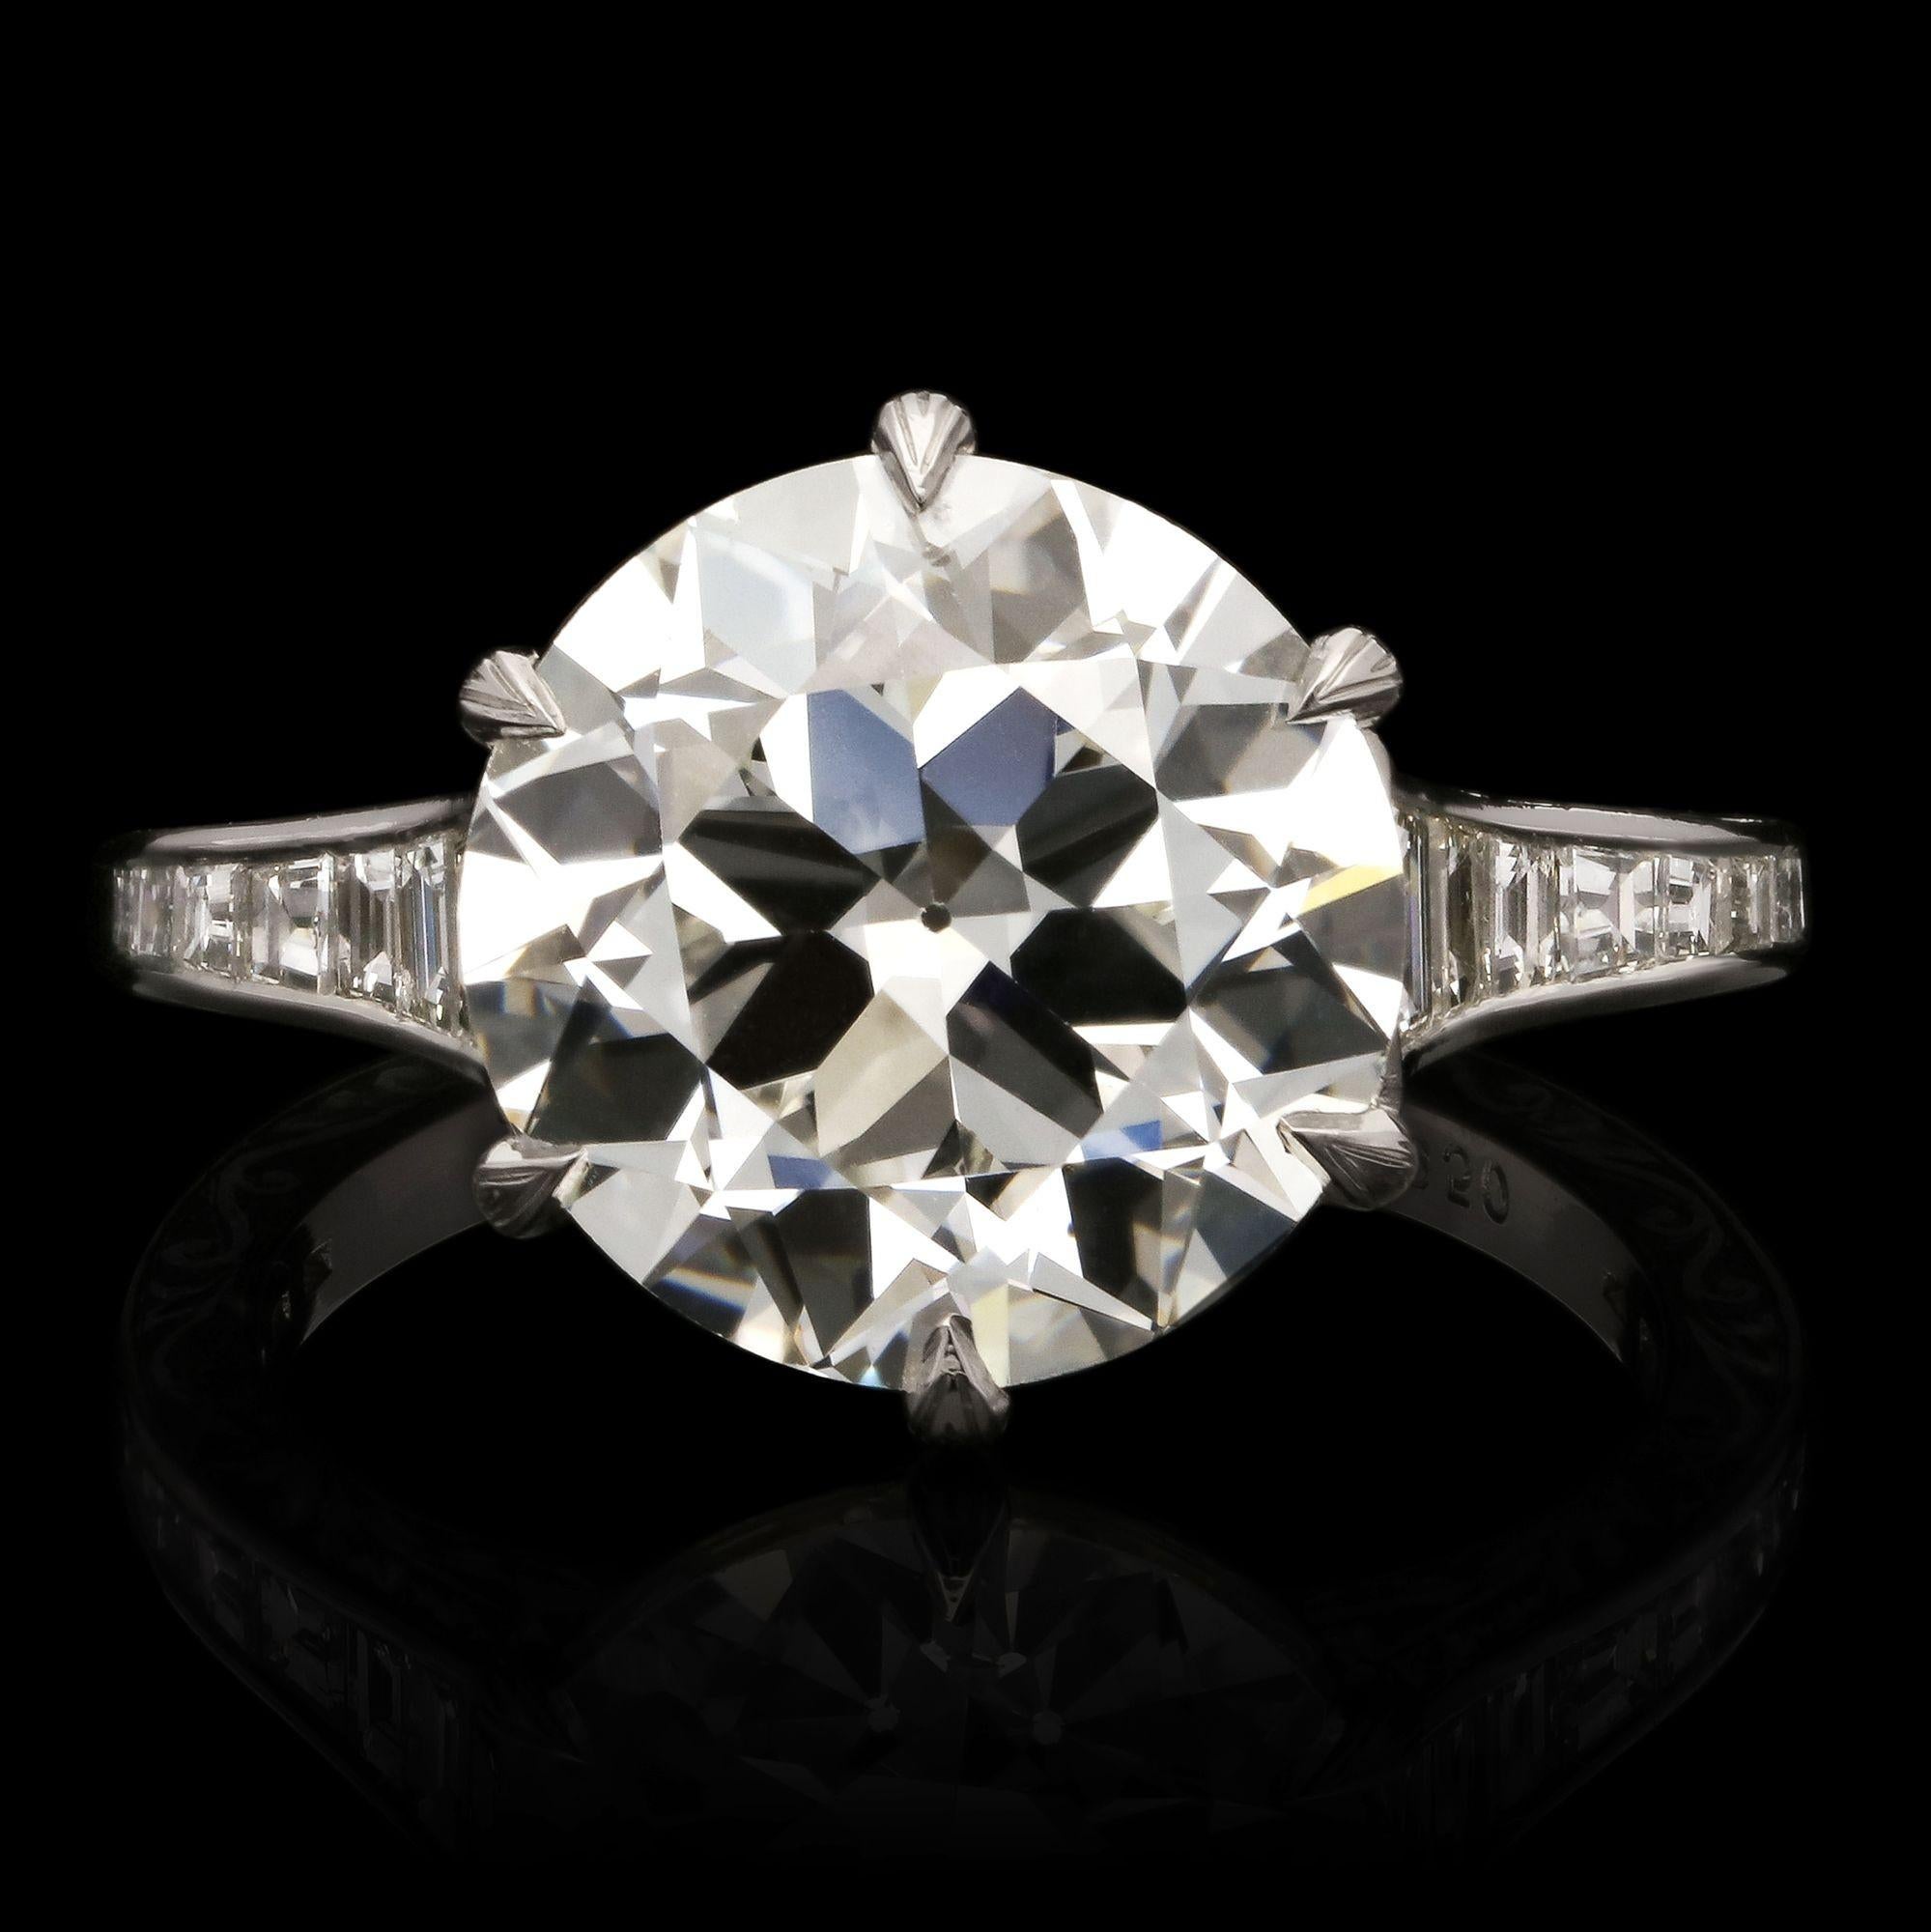 A beautiful old cut diamond ring by Hancocks set with a bright and lively old European brilliant cut diamond weighing 4.23cts and of G colour and VS2 clarity claw set in platinum between elegantly tapering shoulders channel set with calibre cut